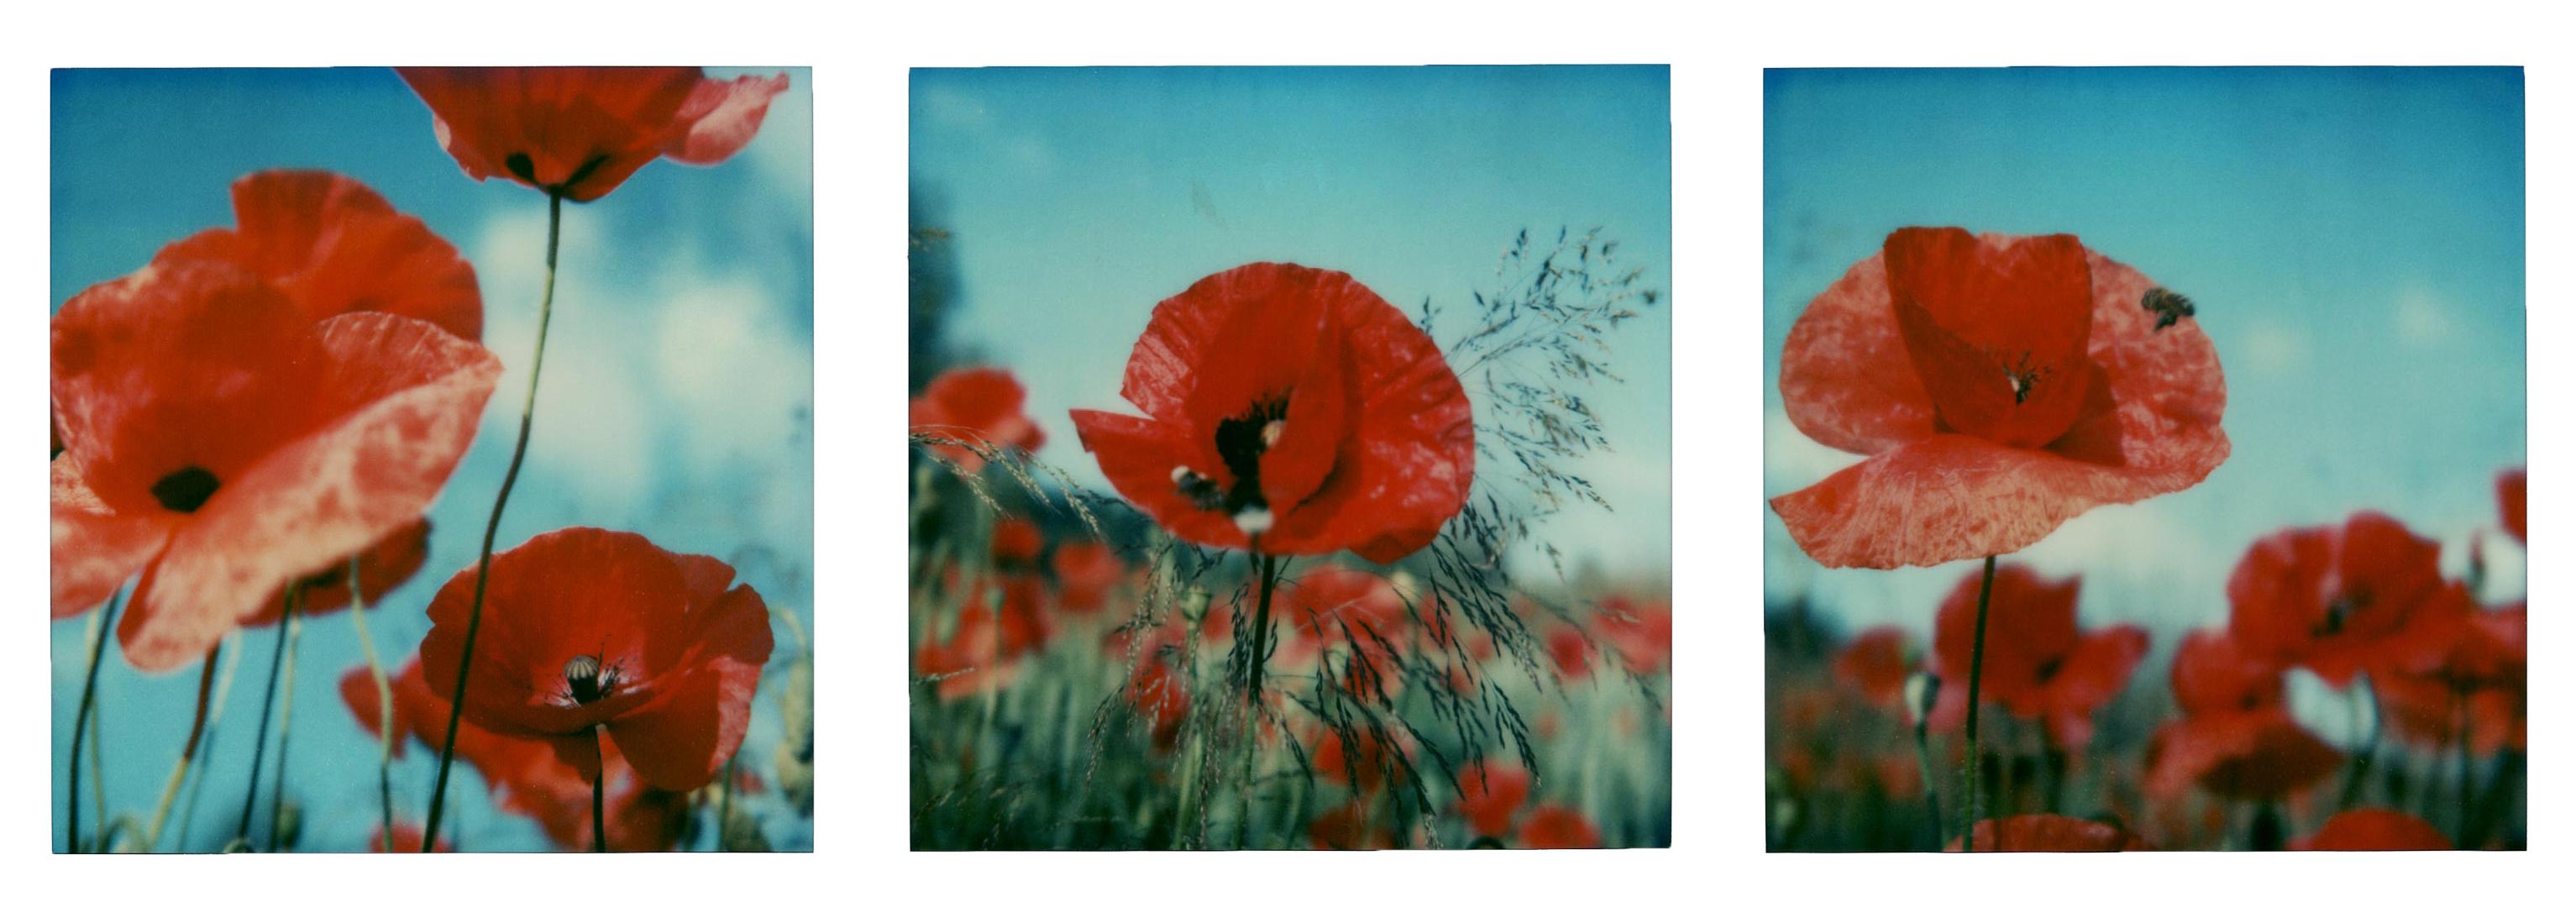 Carmen de Vos Landscape Photograph - Poppy Realm #ROW [From the series Wild Things]